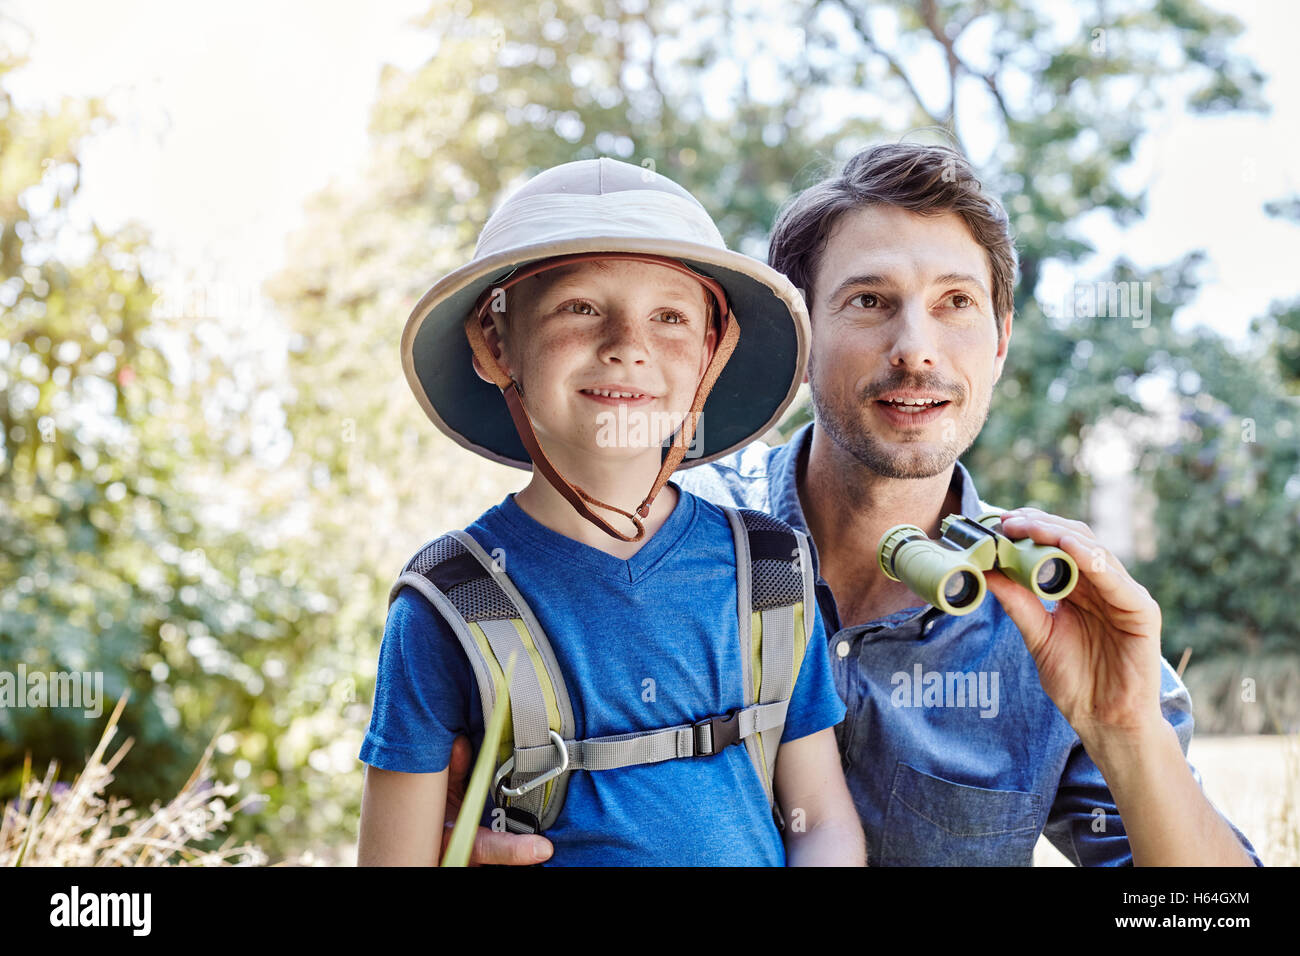 Father and son on expedition Stock Photo